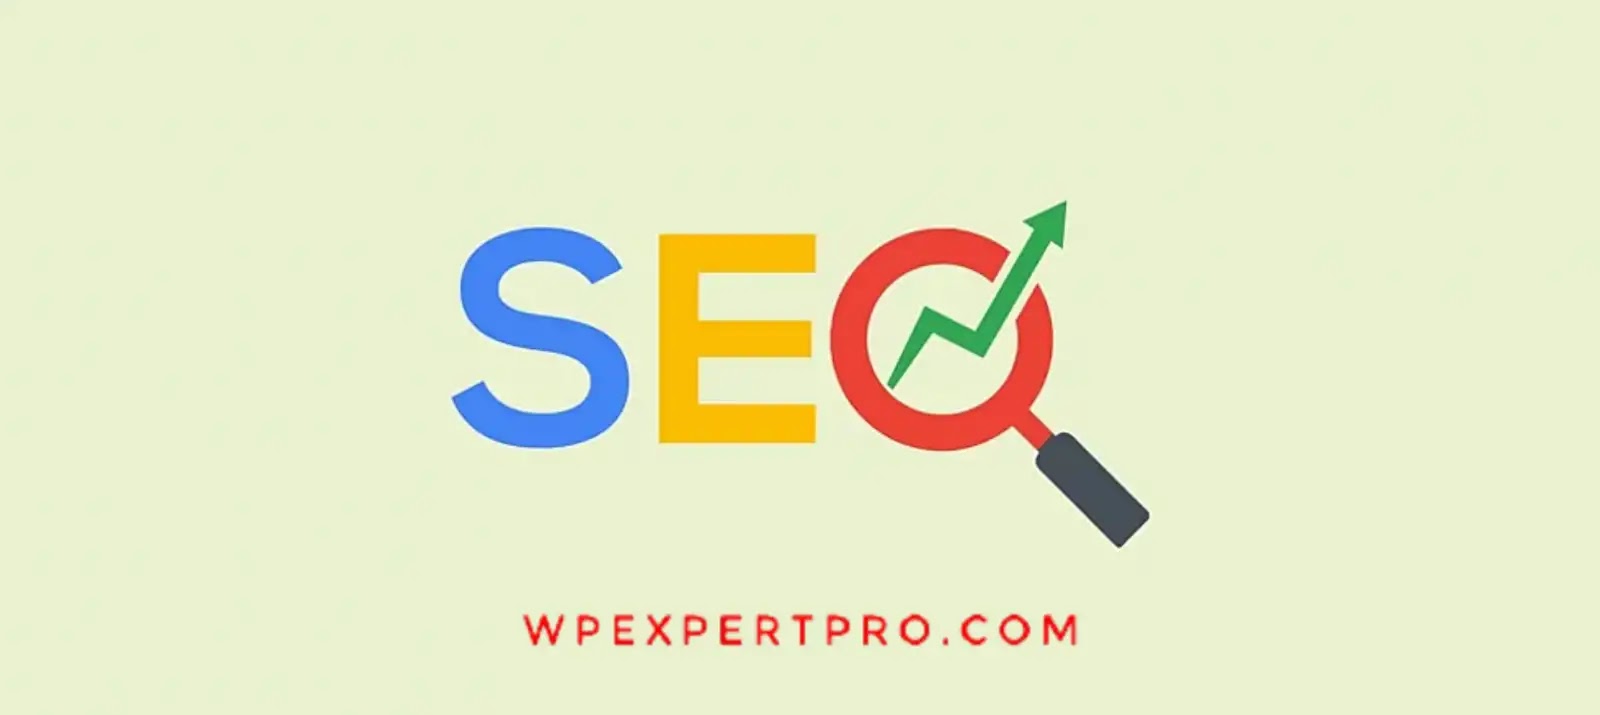 SEO, or Search Engine Optimization, is a word that refers to the process and methods of optimizing a website for better search results display.